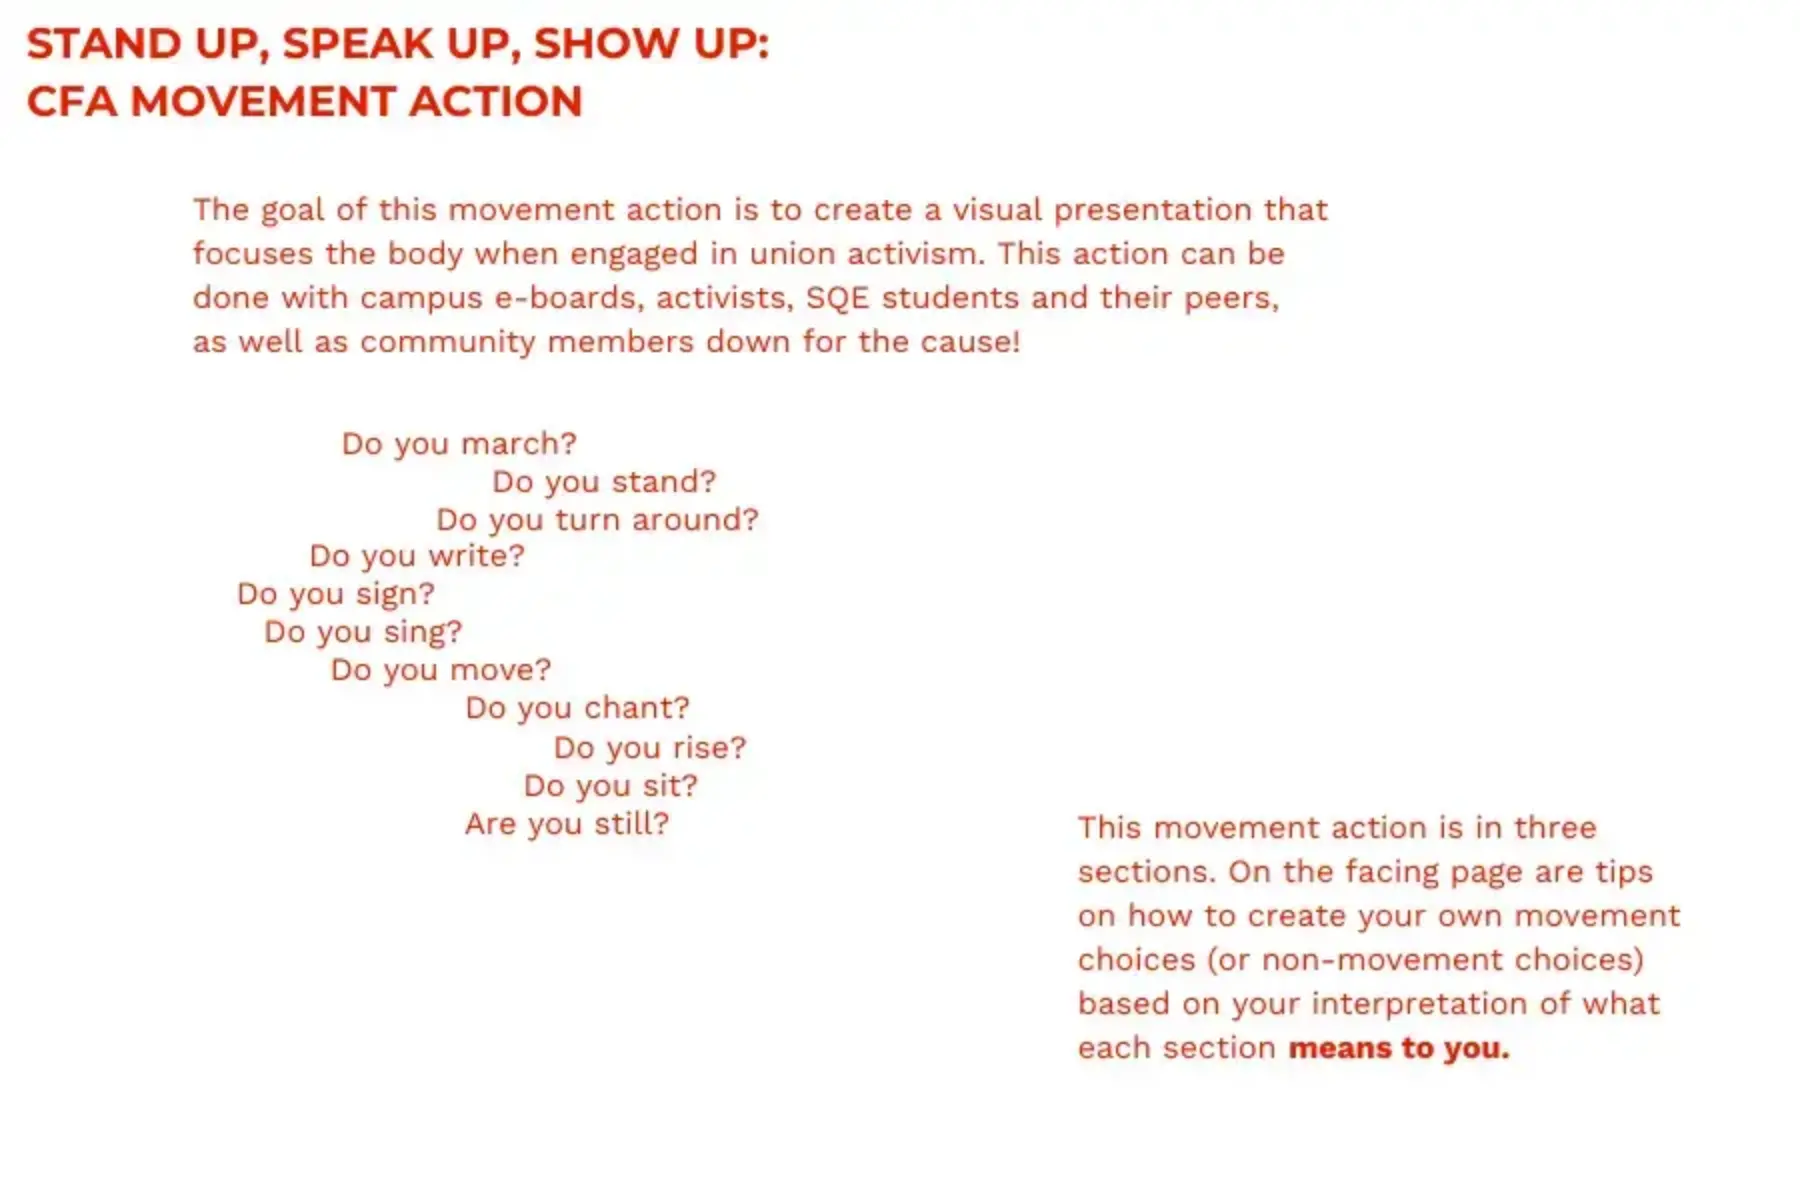 White background with red text that reads STAND UP, SPEAK UP, SHOW UP: CFA MOVEMENT ACTION: The goal of this movement action is to create a visual presentation that focuses the body when engaged in union activism. This action can be done with campus e-boards, activists, SQE students and their peers, as well as community members down for the cause! Do you march? Do you stand? Do you turn around? Do you write? Do you sign? Do you sing? Do you move? Do you chant? Do you rise? Do you sit? Are you still? This movement action is in three sections. On the facing page are tips on how to create your own movement choices (or non-movement choices) based on your interpretation of what each section means to you.